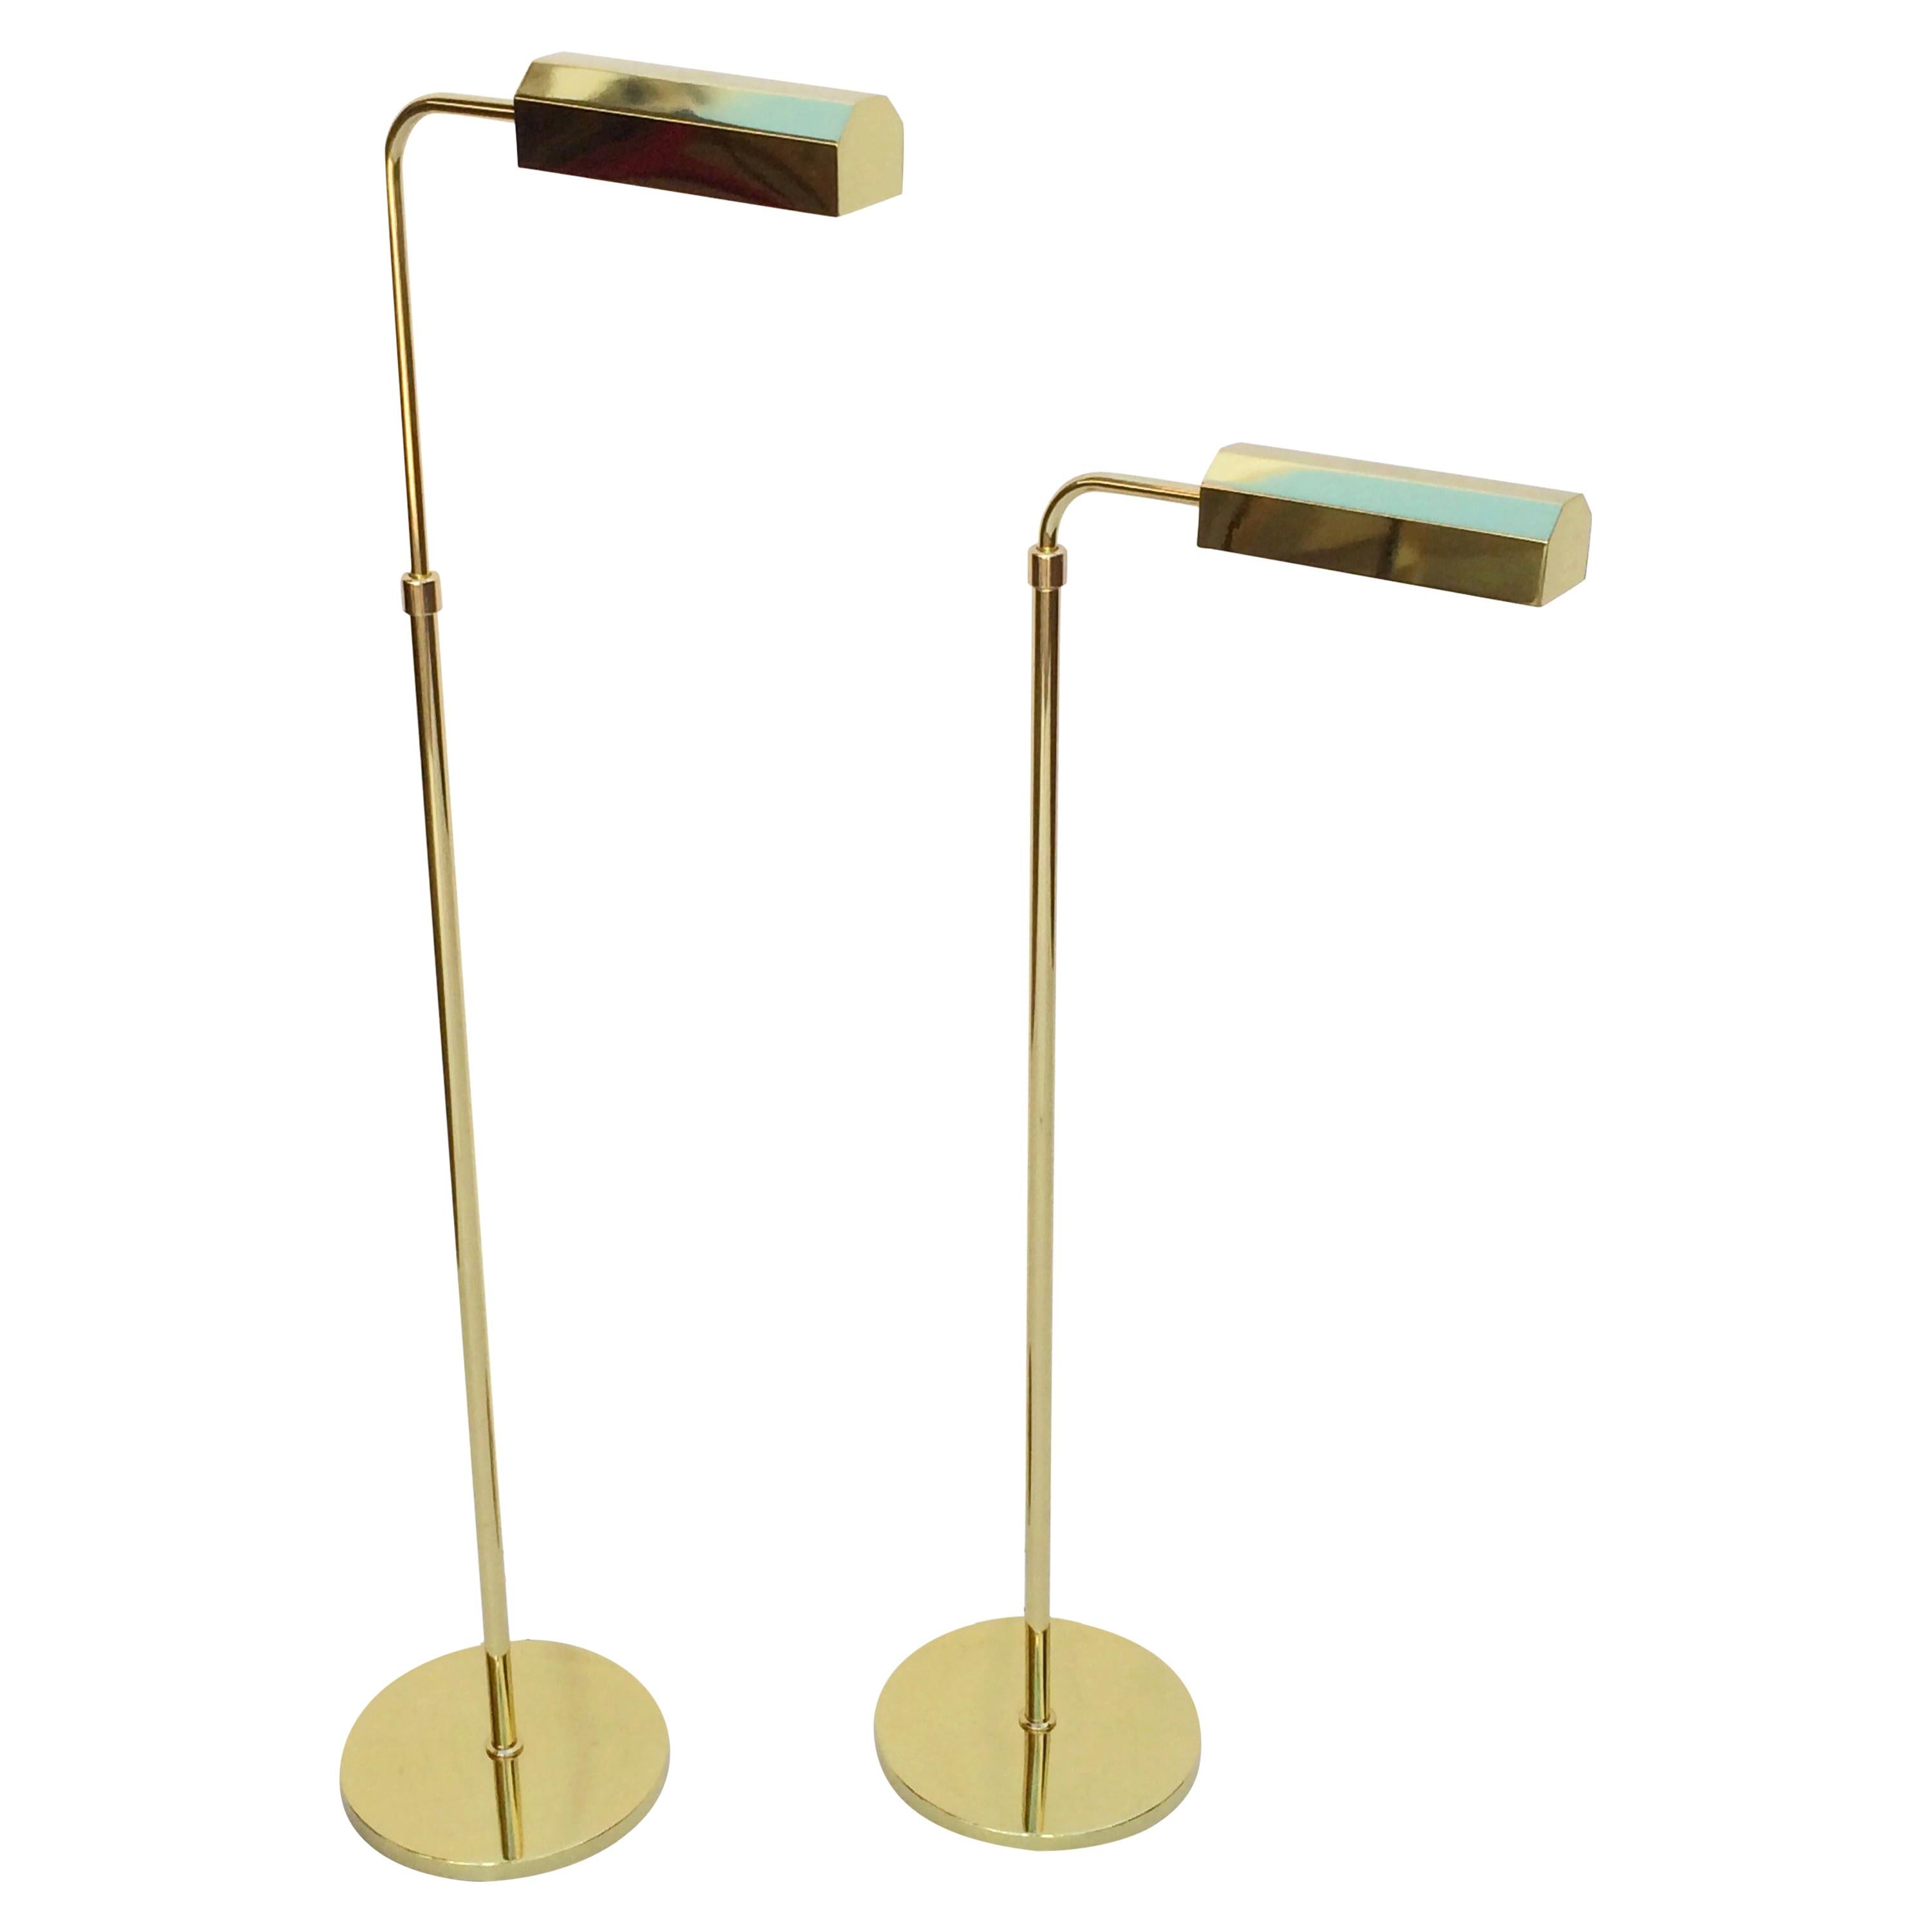 Pair of Polished Brass Adjustable Floor Lamps